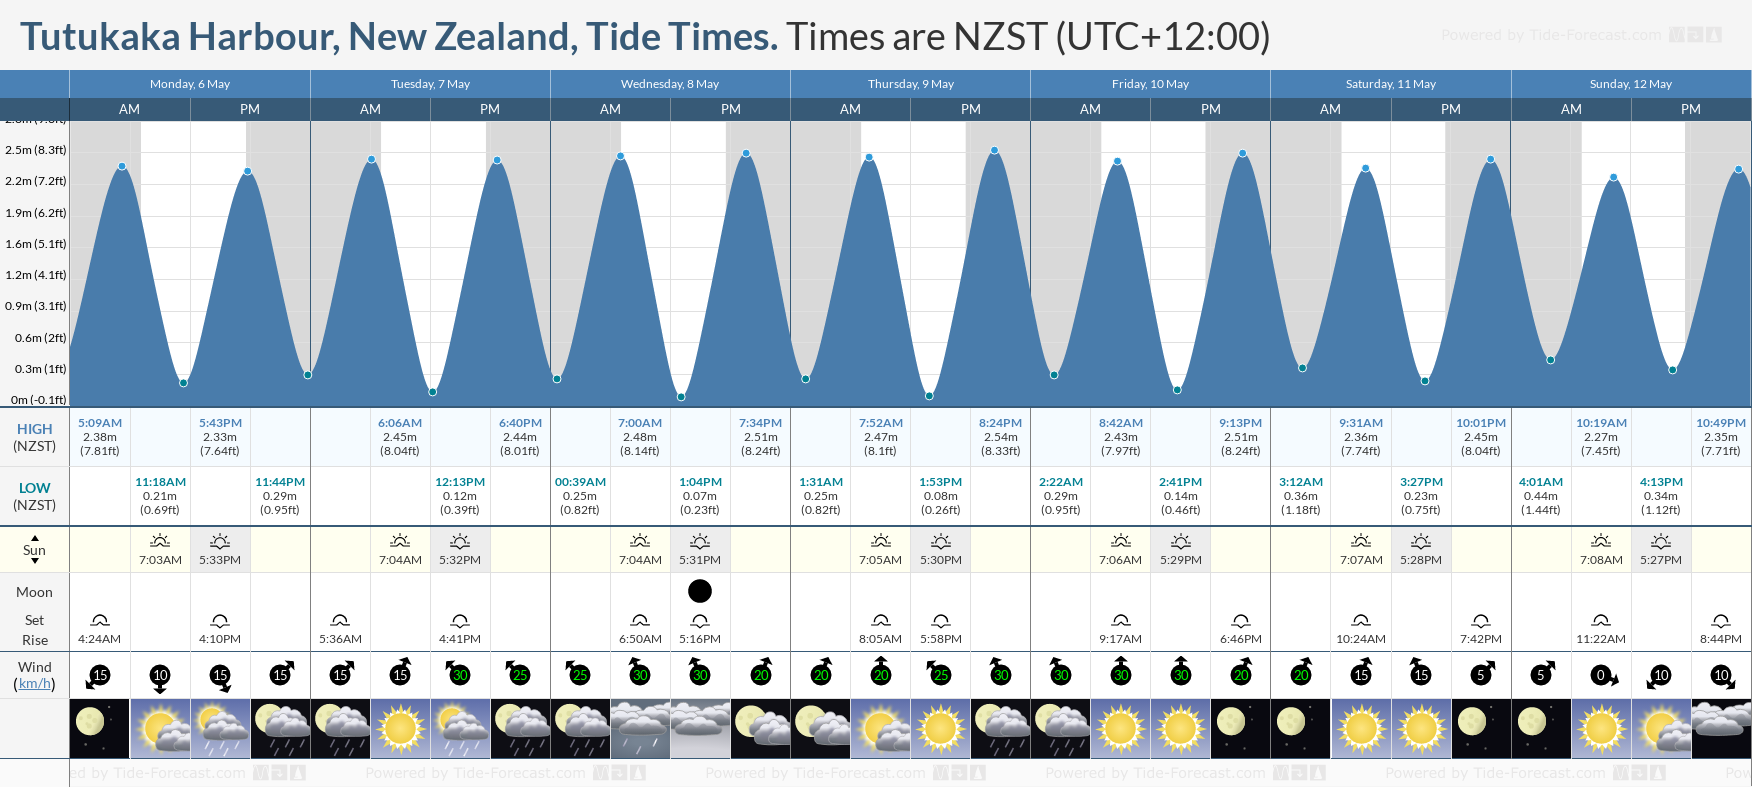 Tutukaka Harbour, New Zealand Tide Chart including high and low tide tide times for the next 7 days